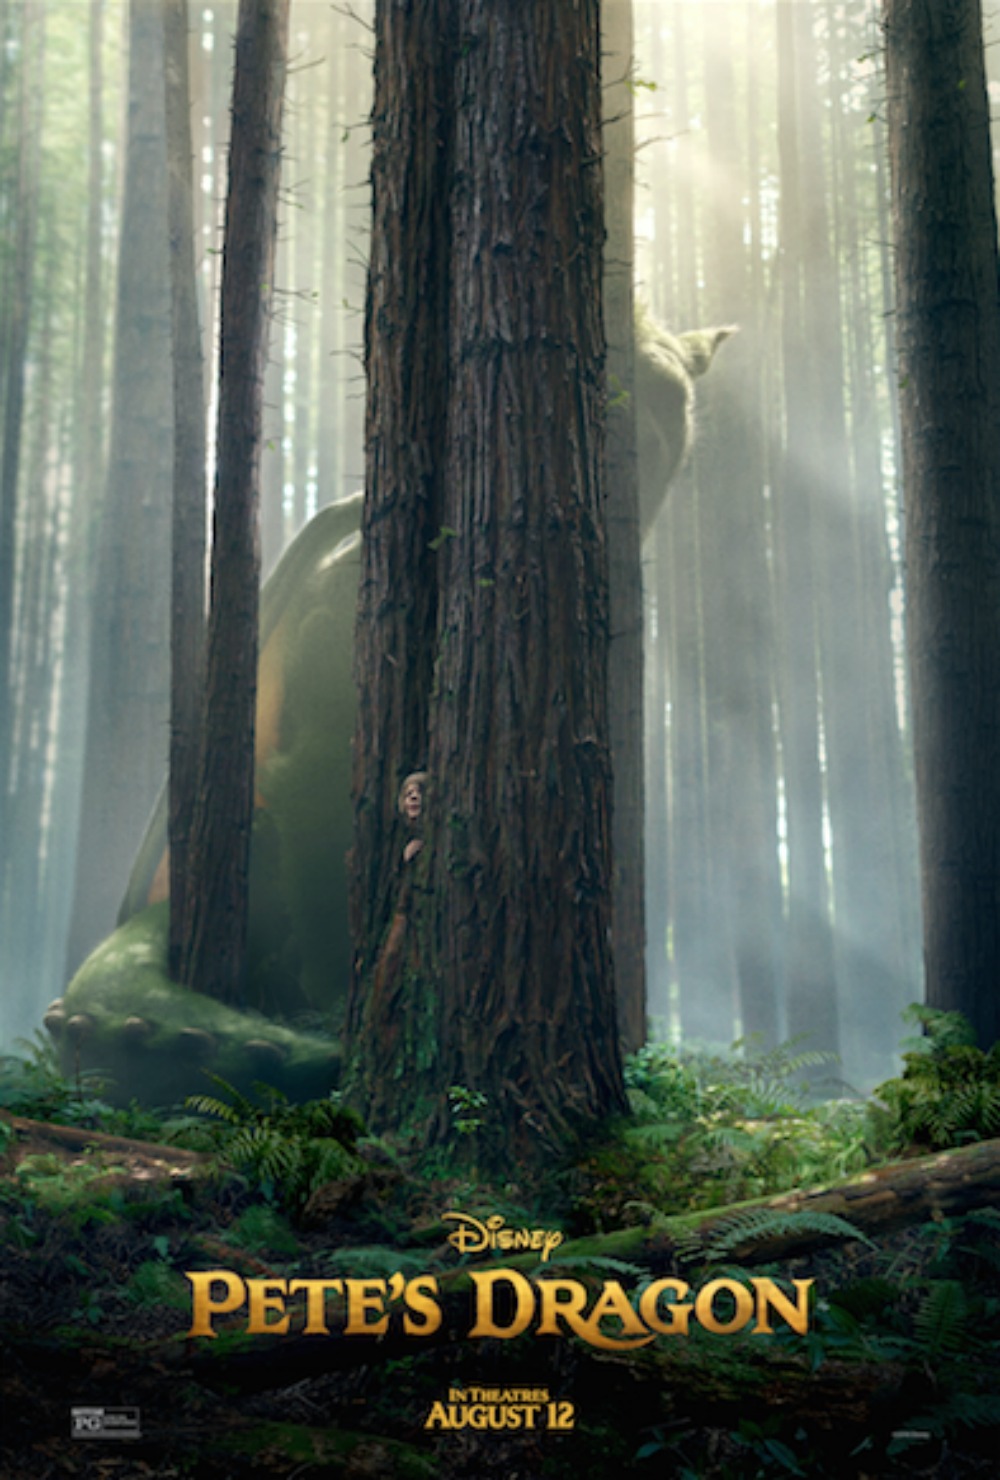 Disney's Pete's Dragon Poster and Trailer